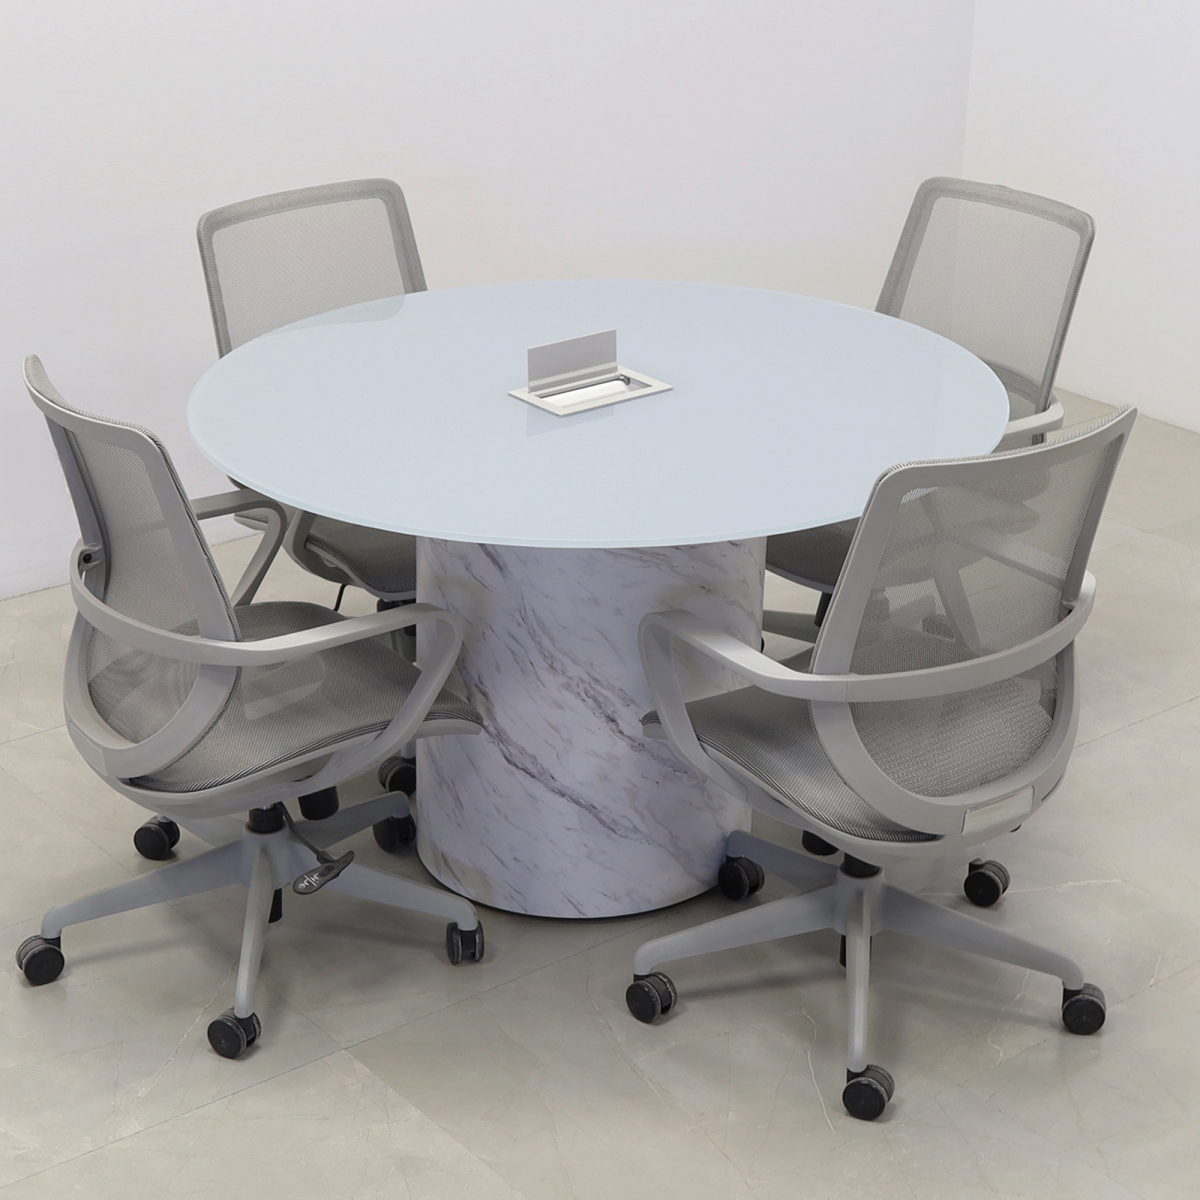 Omaha Round Conference Table With Tempered Glass Top